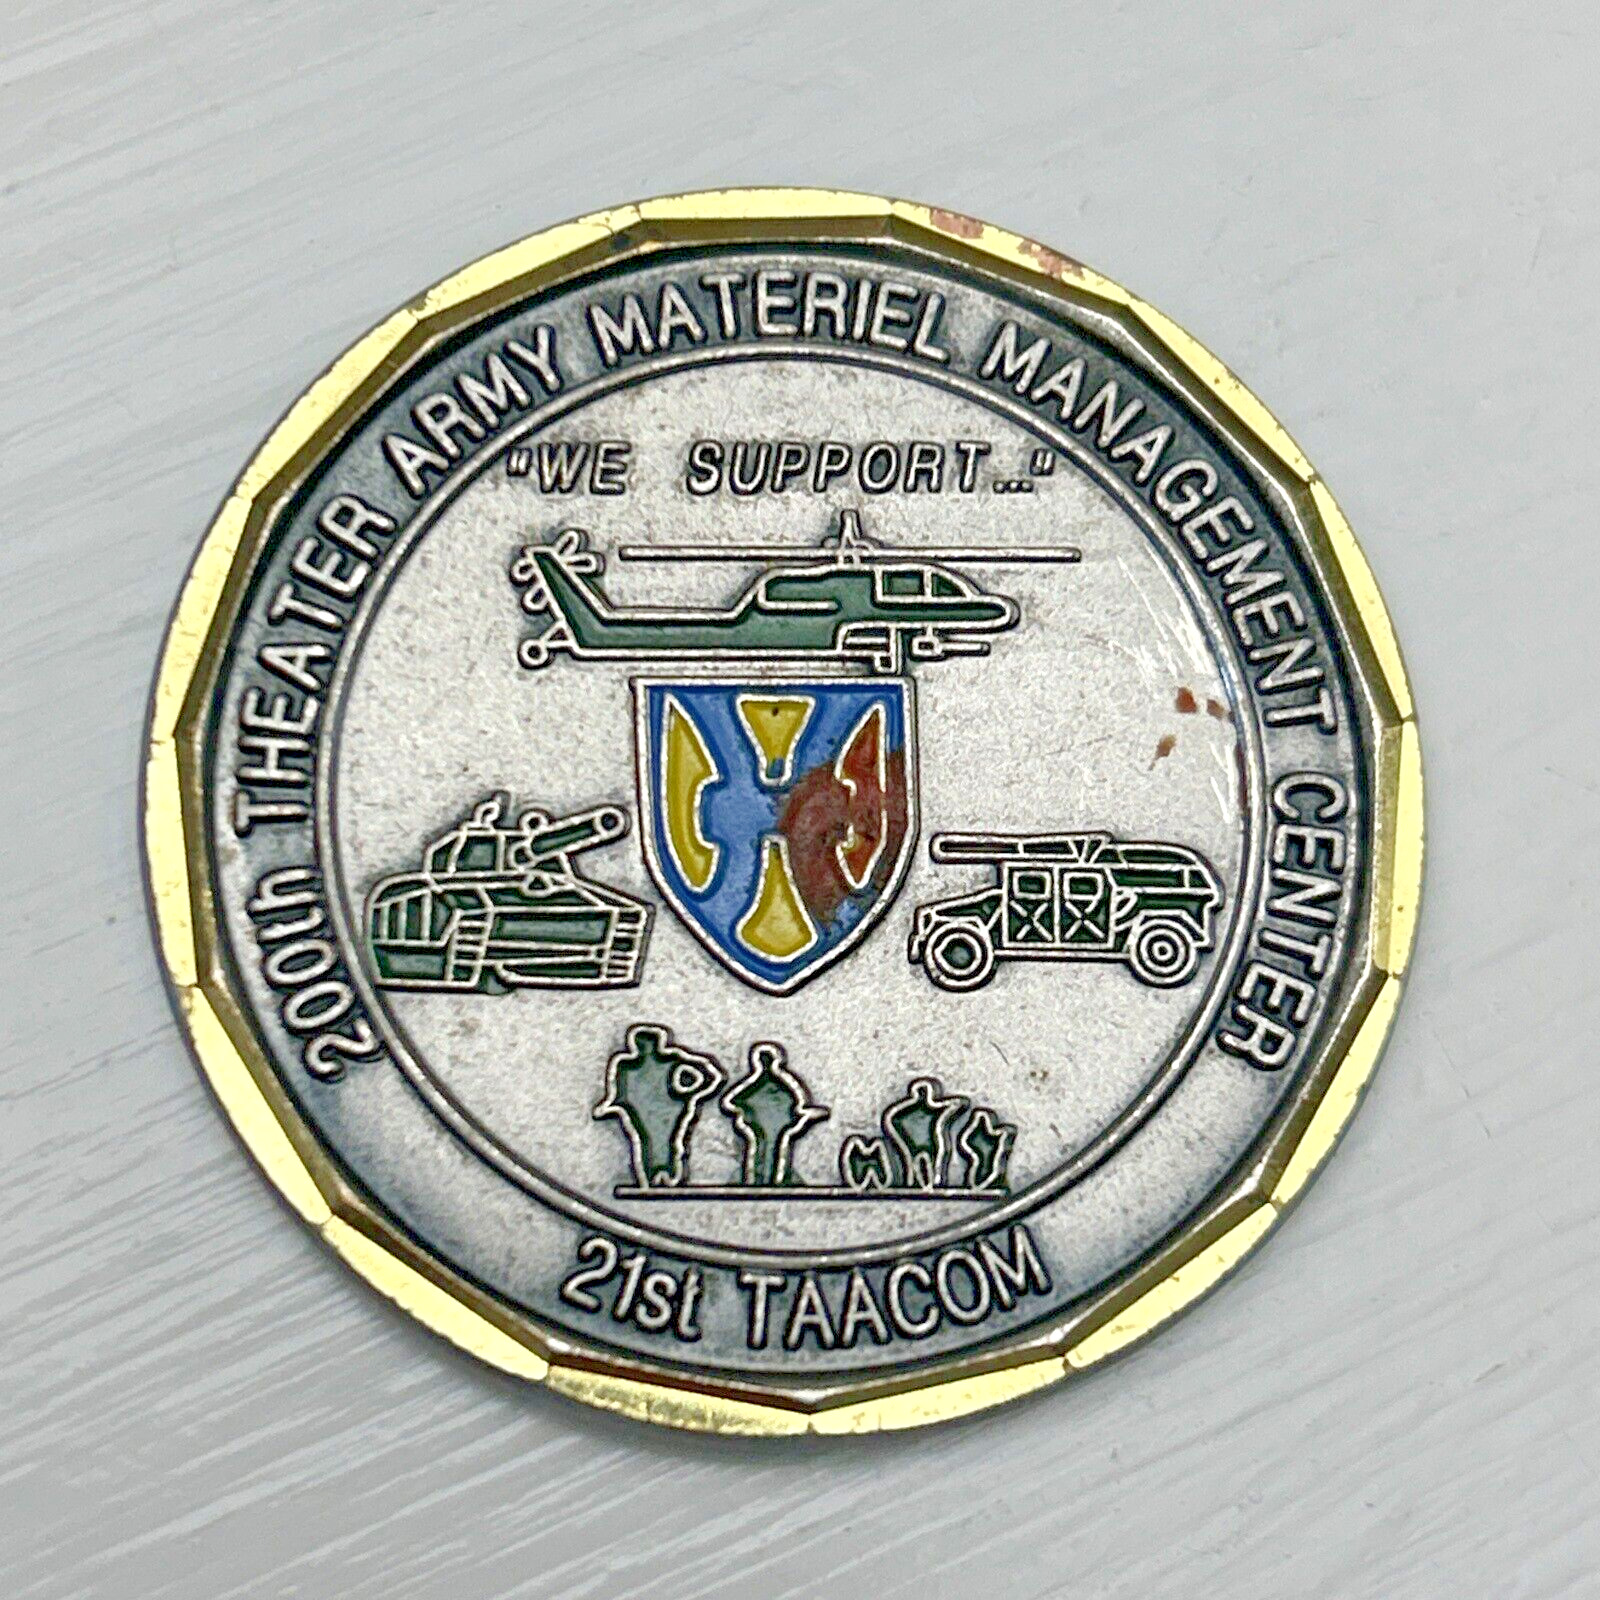 RARE 200th Theater Army Material Management Center Challenge Coin 21st TAACOM